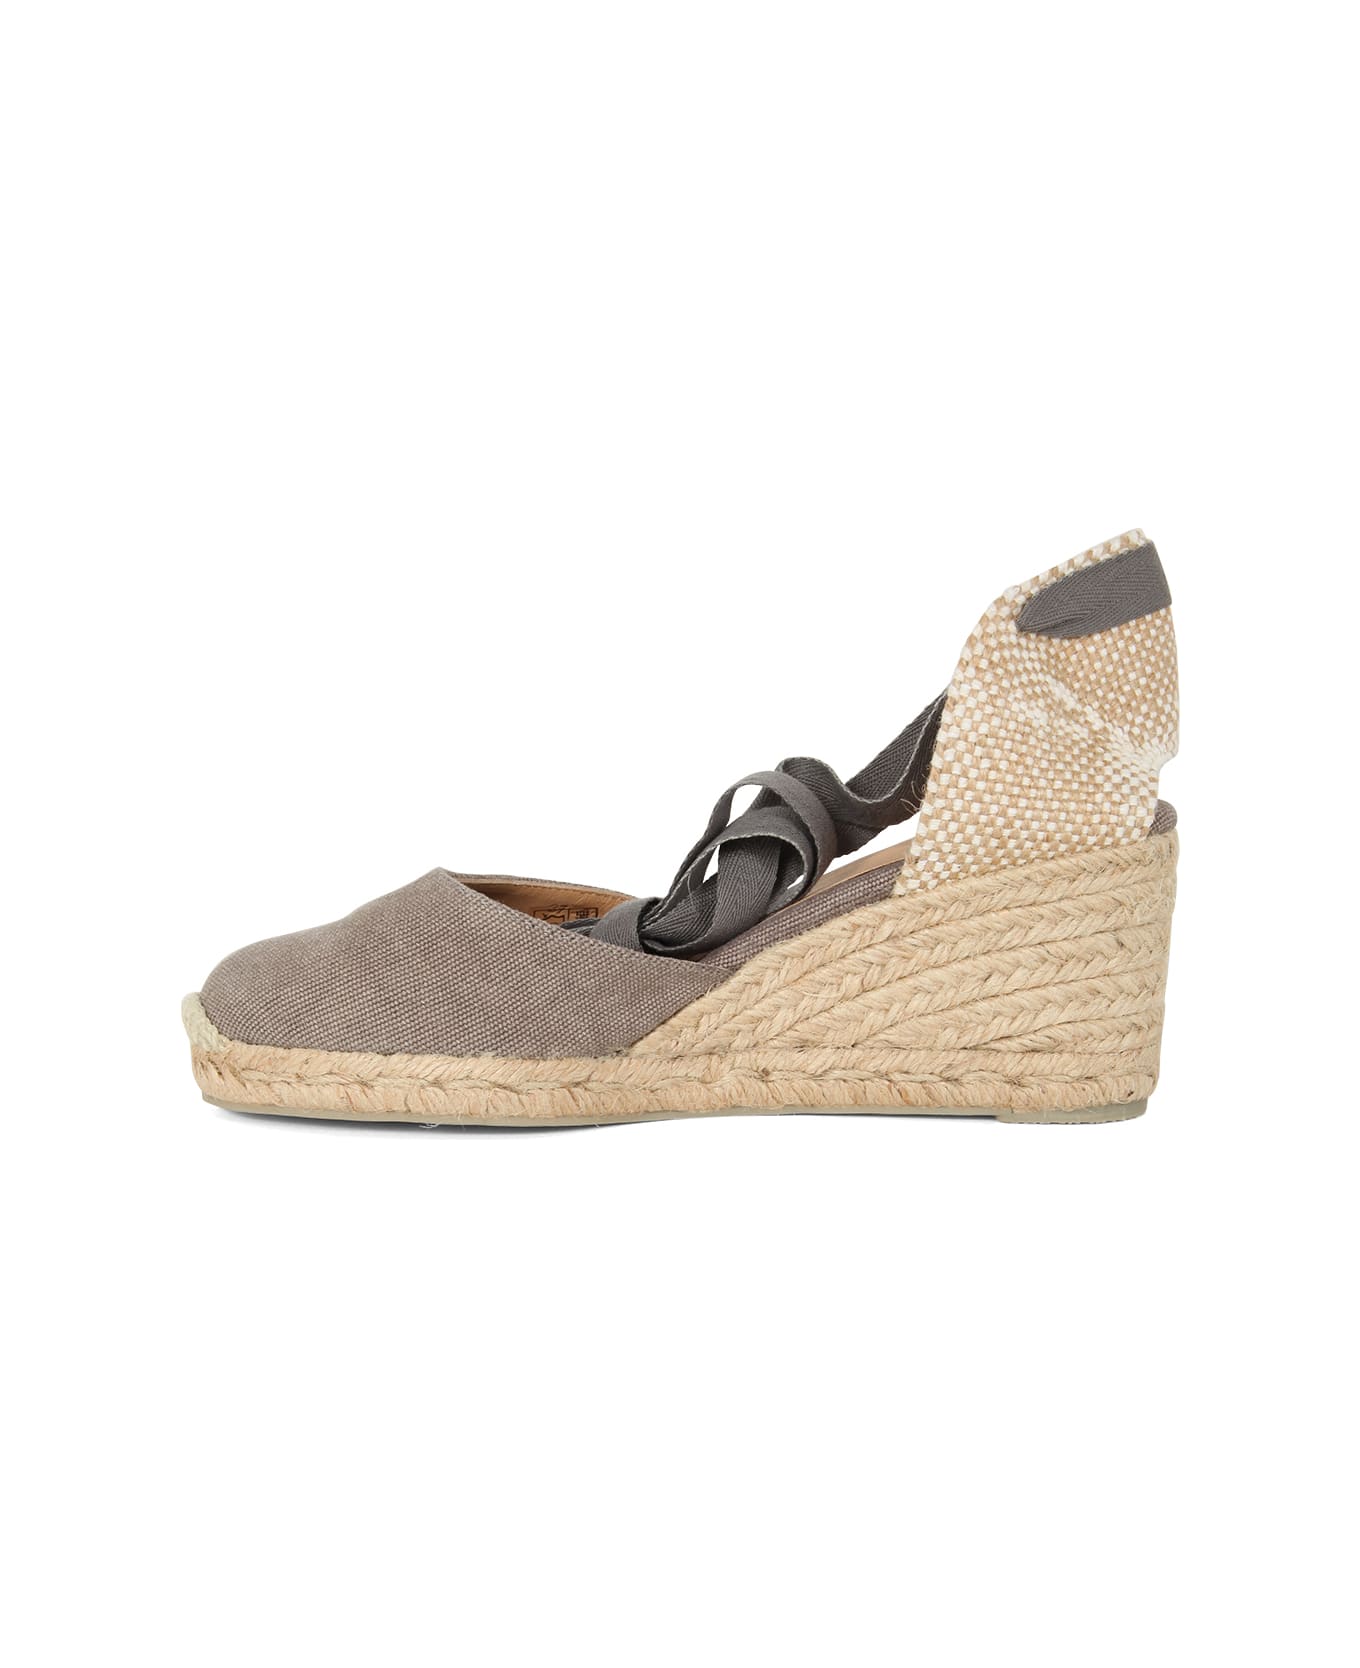 Castañer Carina Espadrilles Wedge Sandal With Ankle Laces - Lead Grey ウェッジシューズ